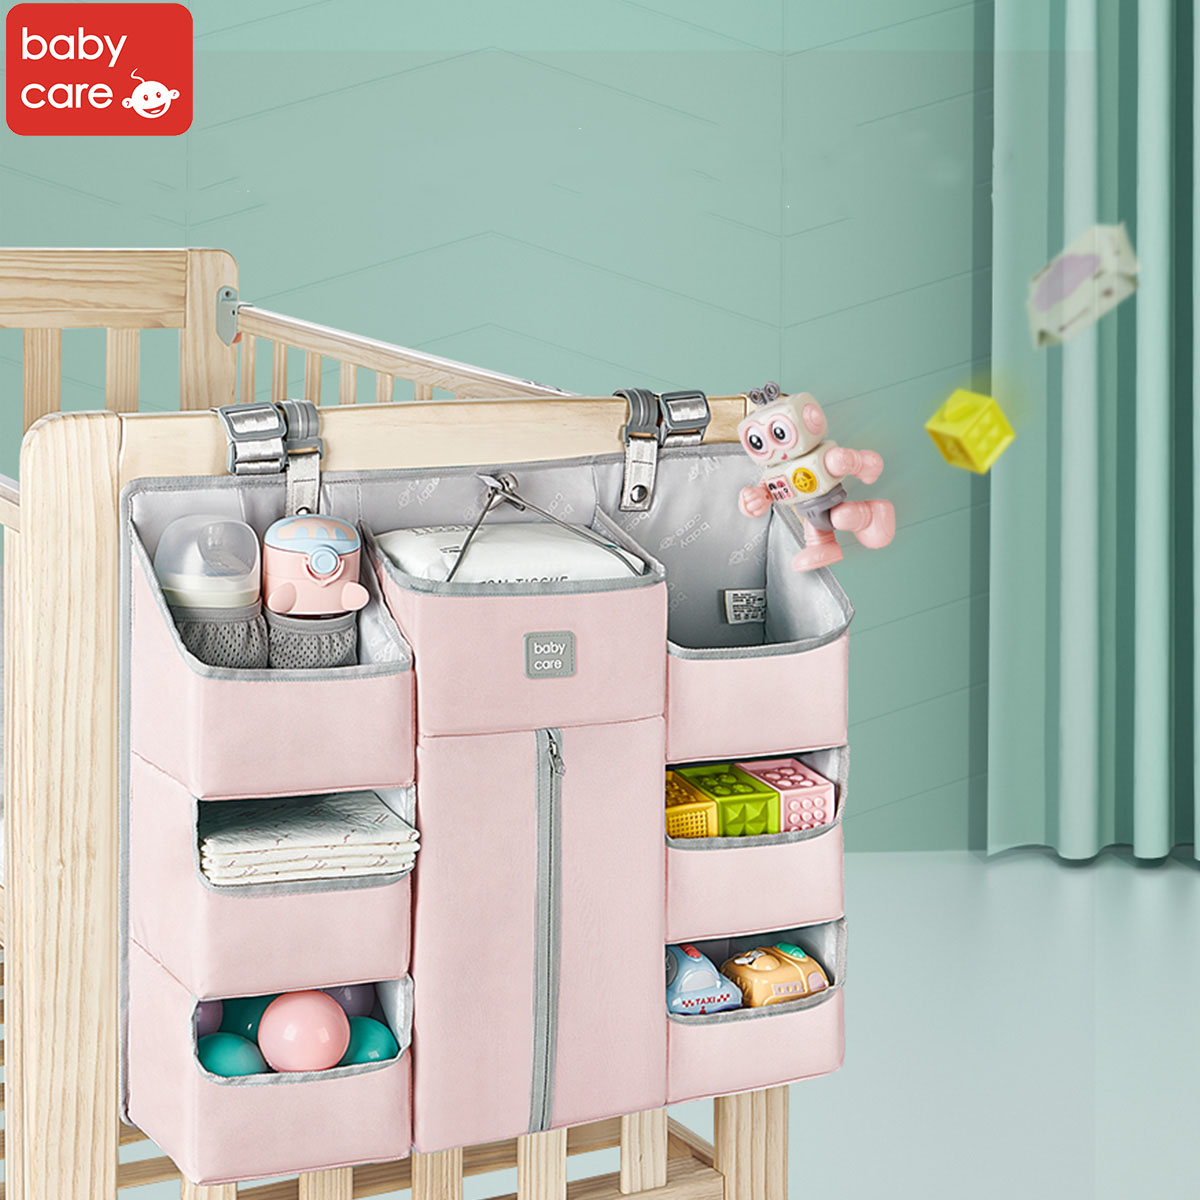 Babycare Hanging Storage Bag - Single layer 3 compartments